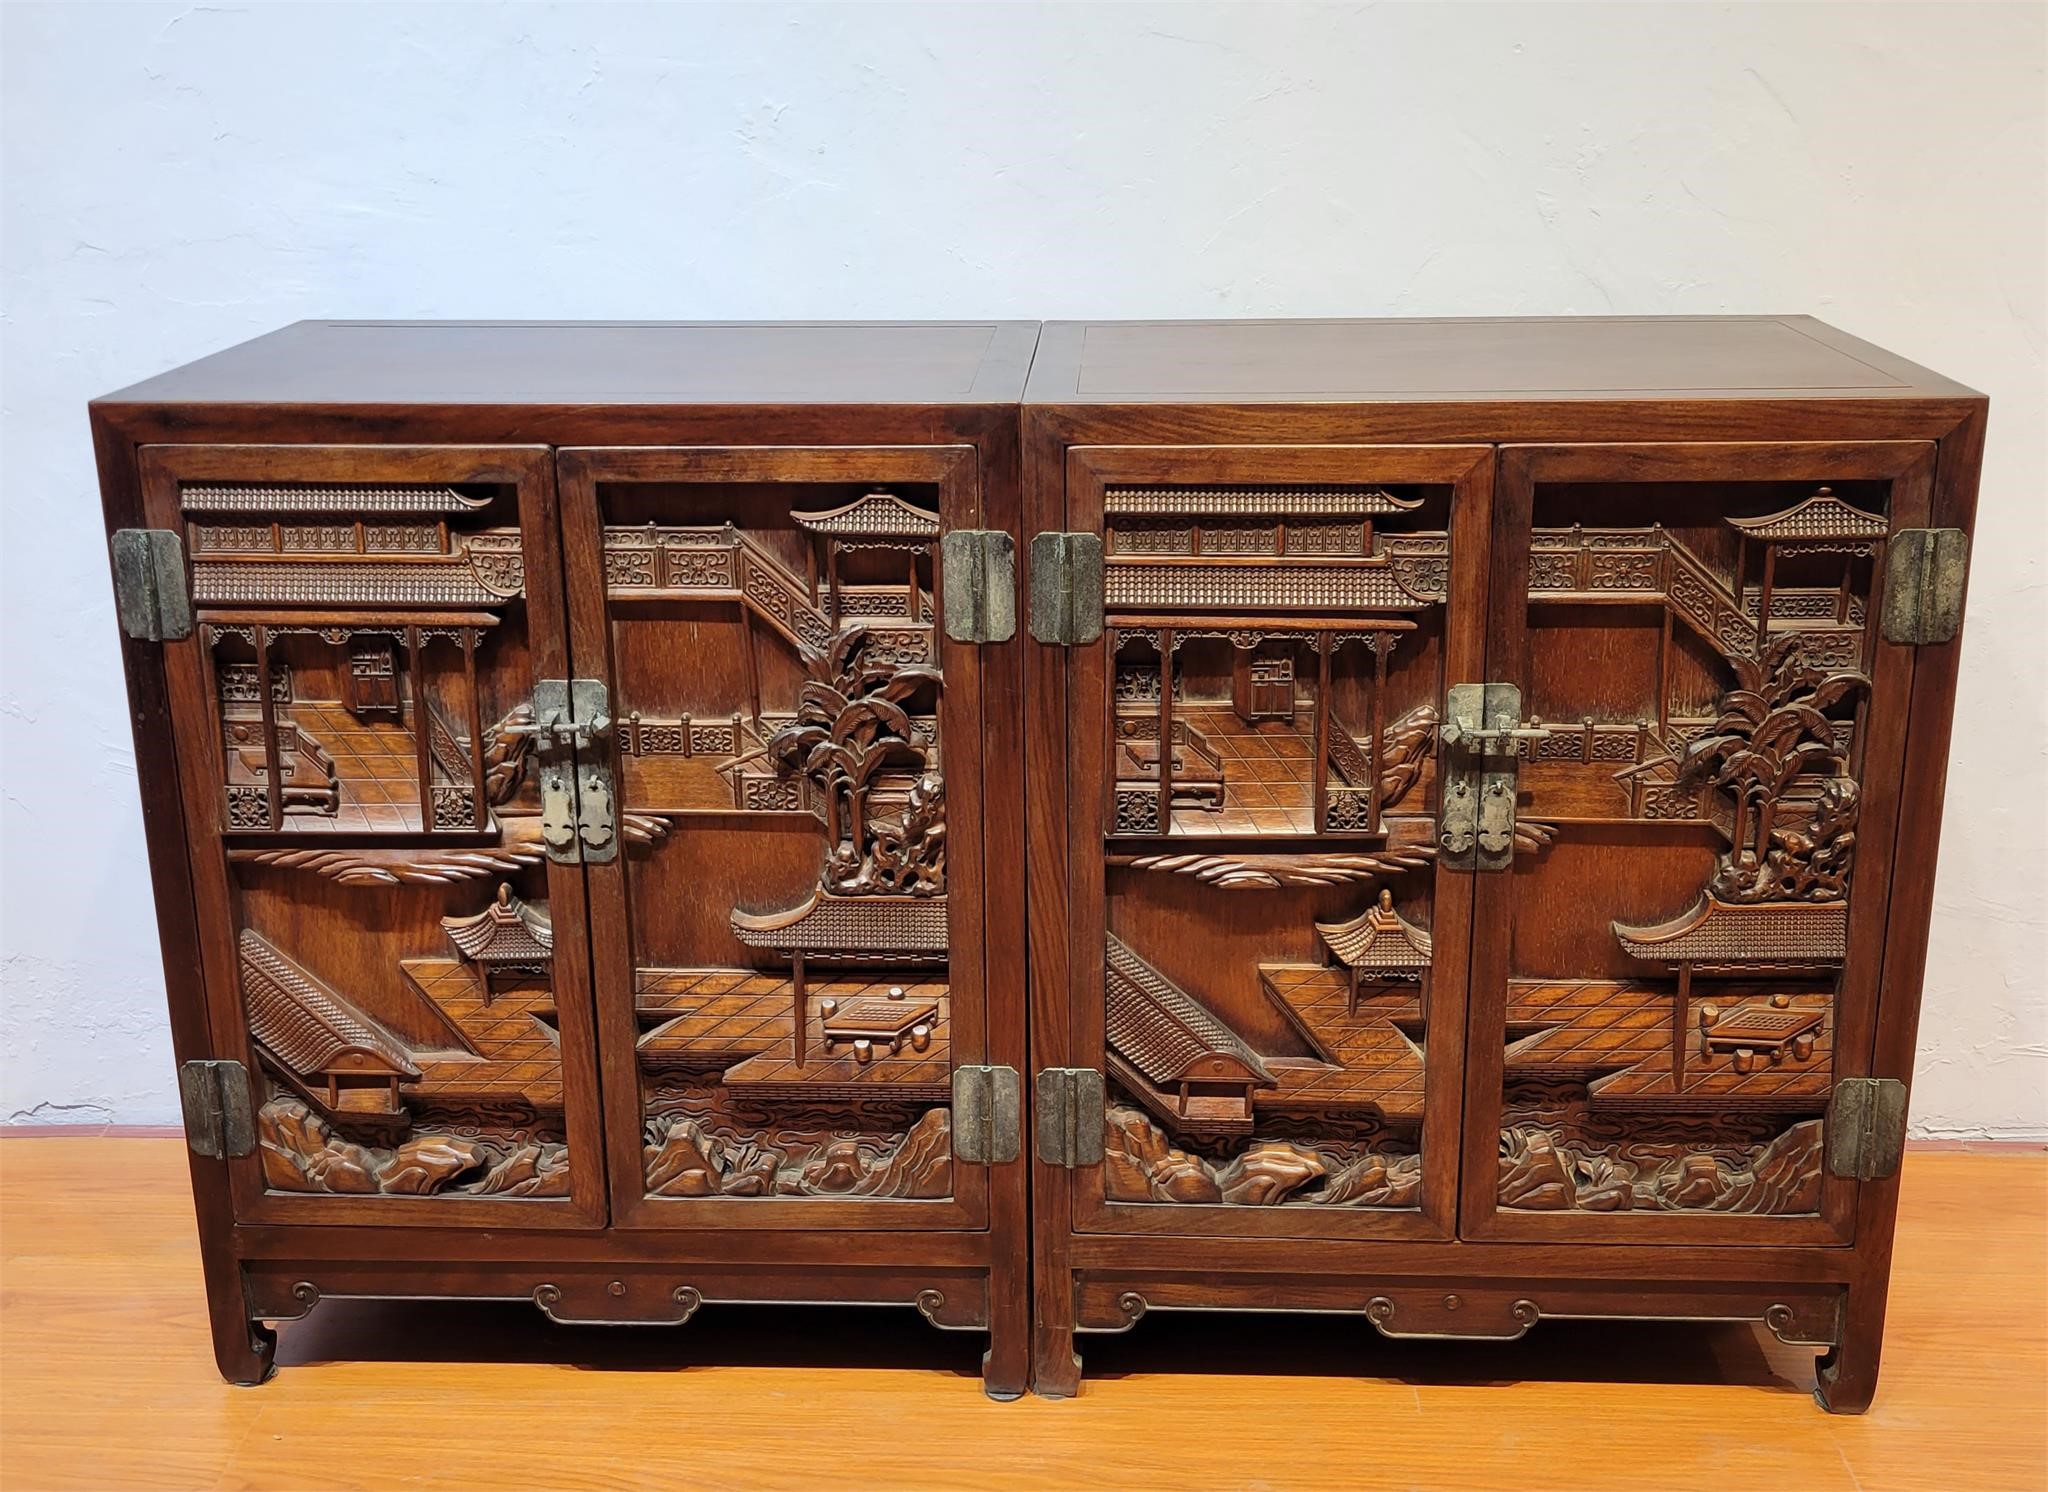 A group of Huanghua pear antique cabinet in Qing D